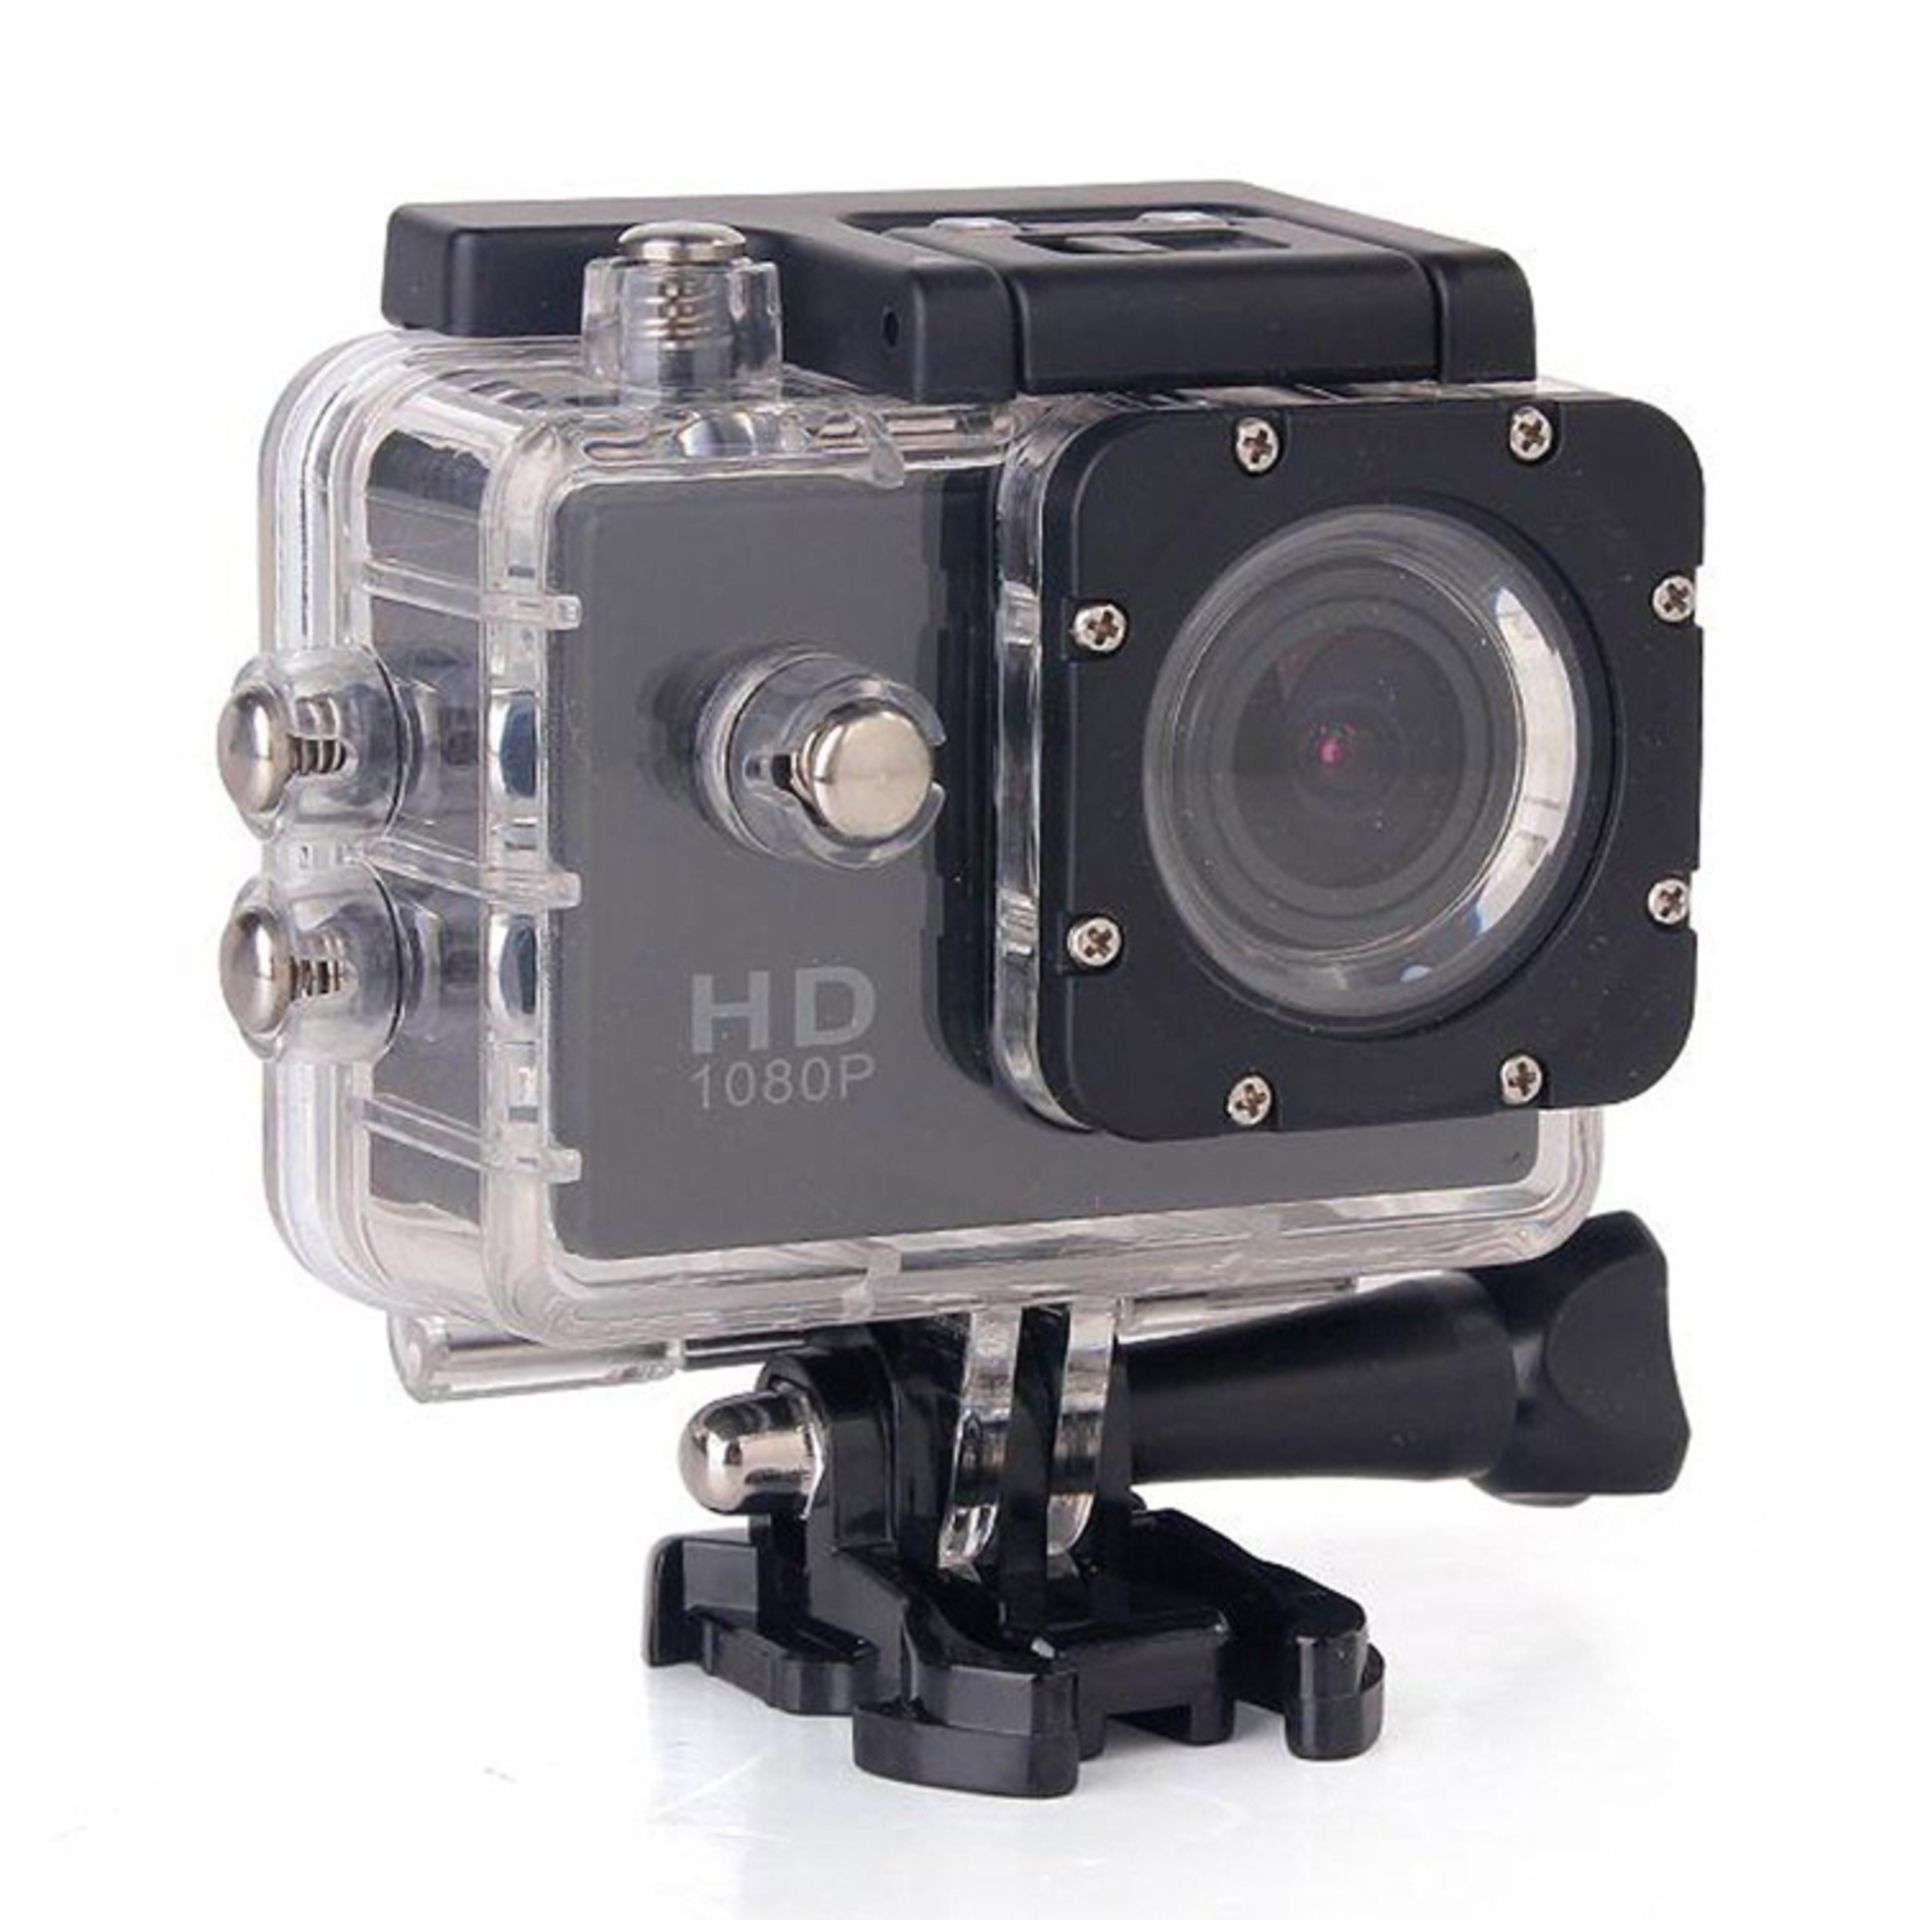 Brand New Full HD 1080p Waterproof Action Camera With Box And Accessories - 30M Waterproof - Multi